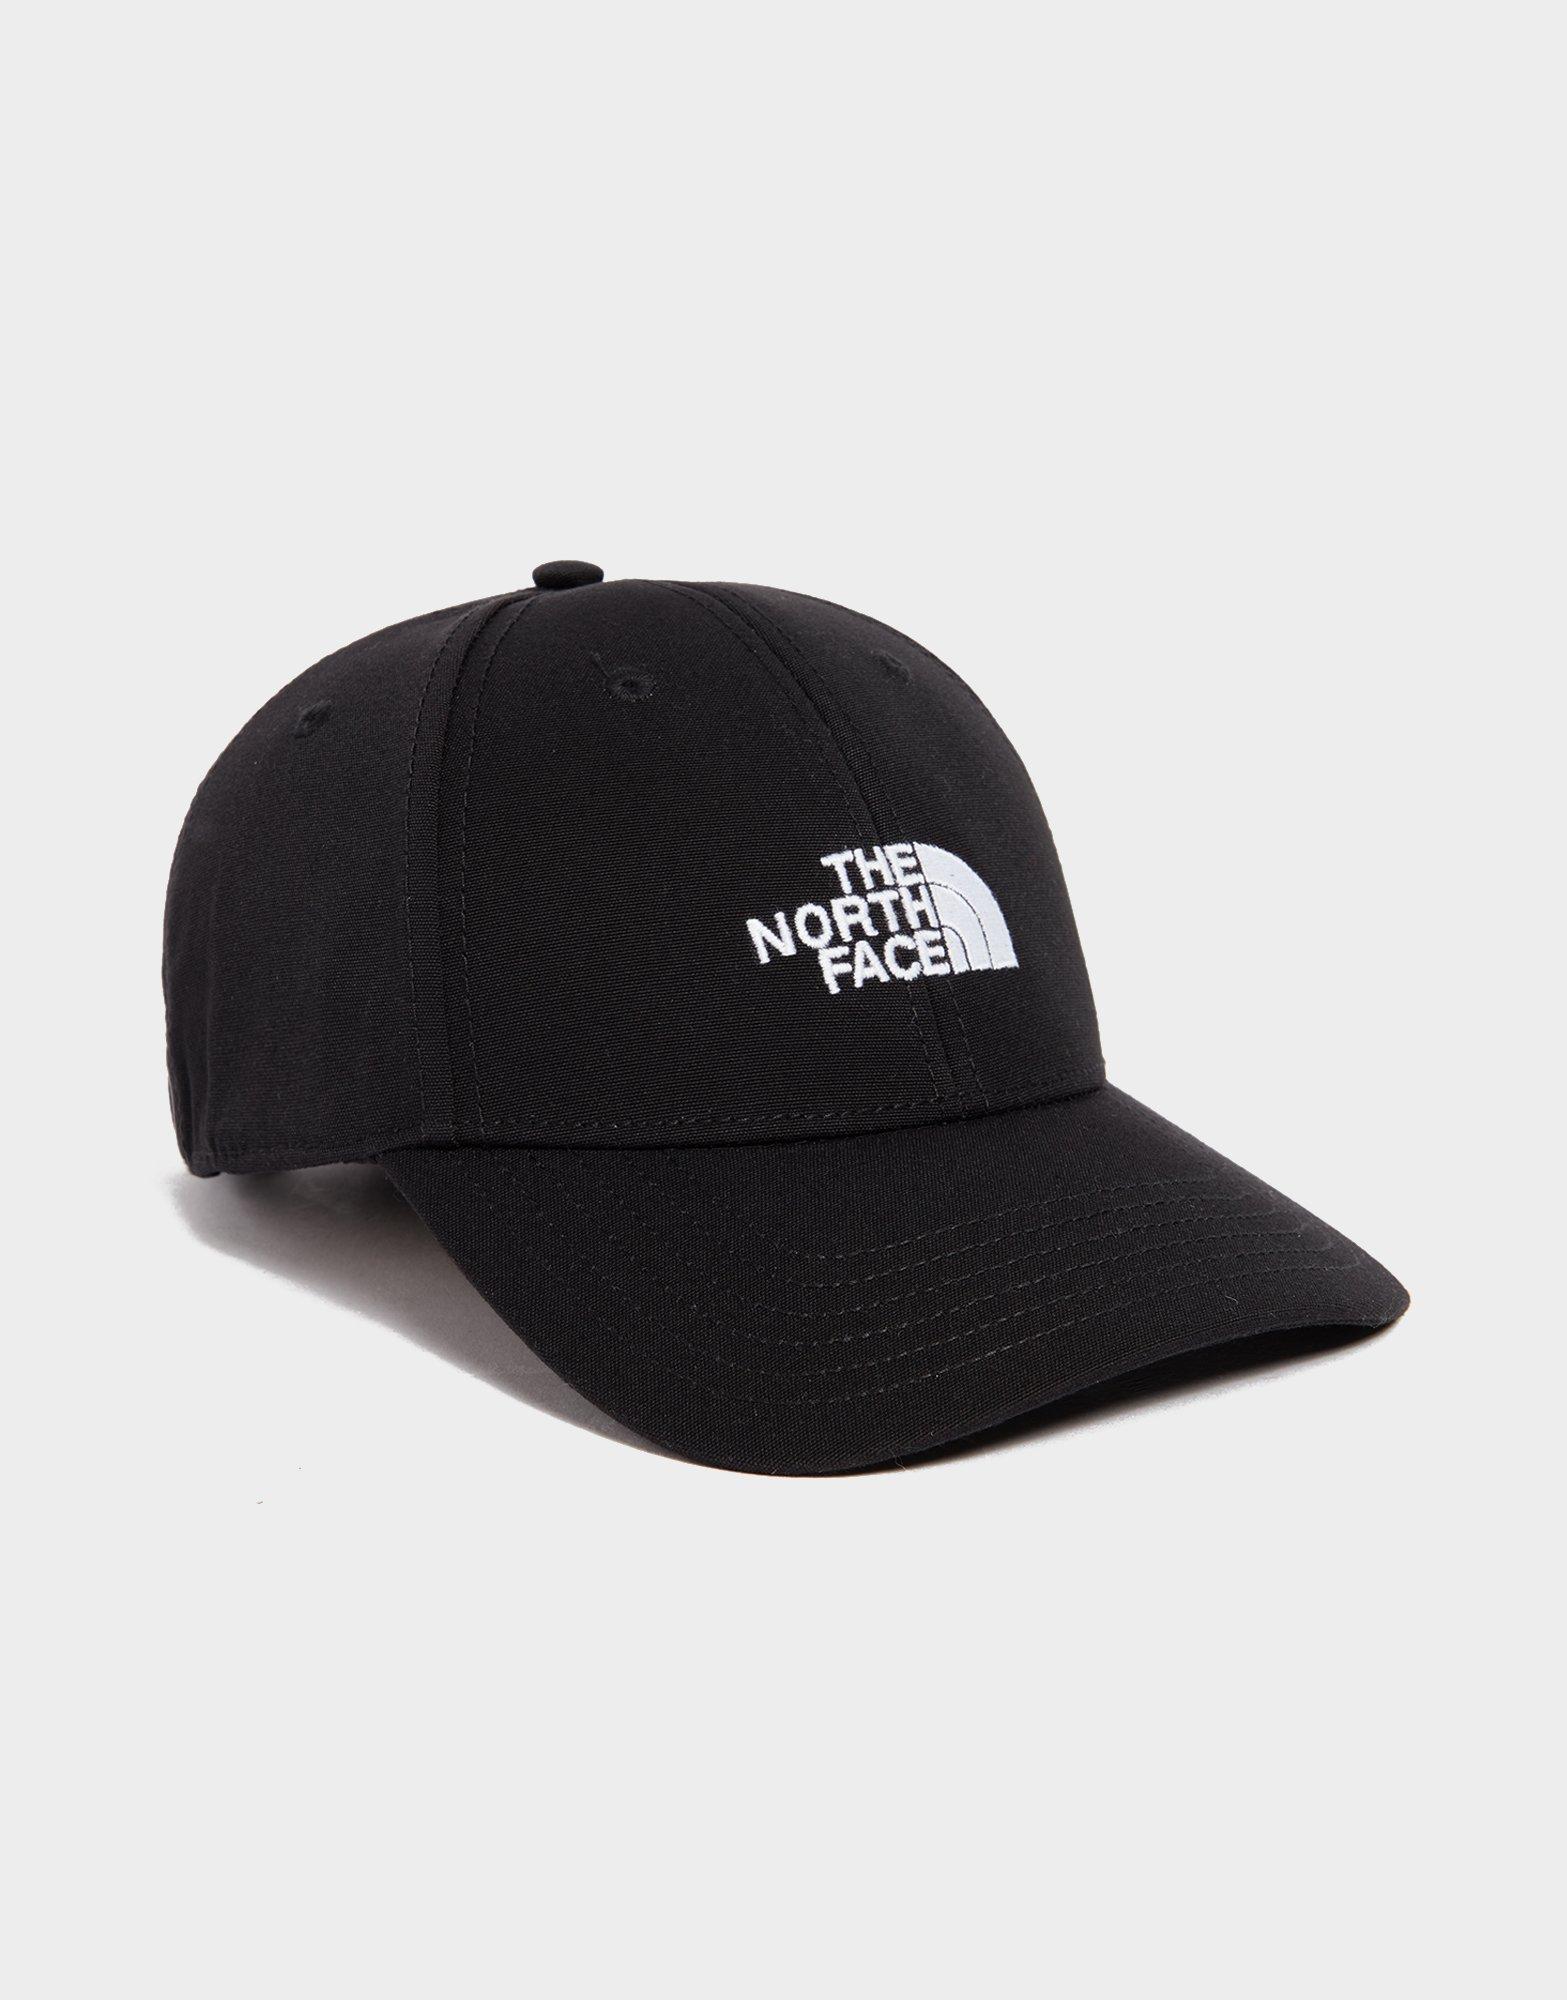 The North Face Casquette Recycled '66 Classique Homme Noir- JD Sports France